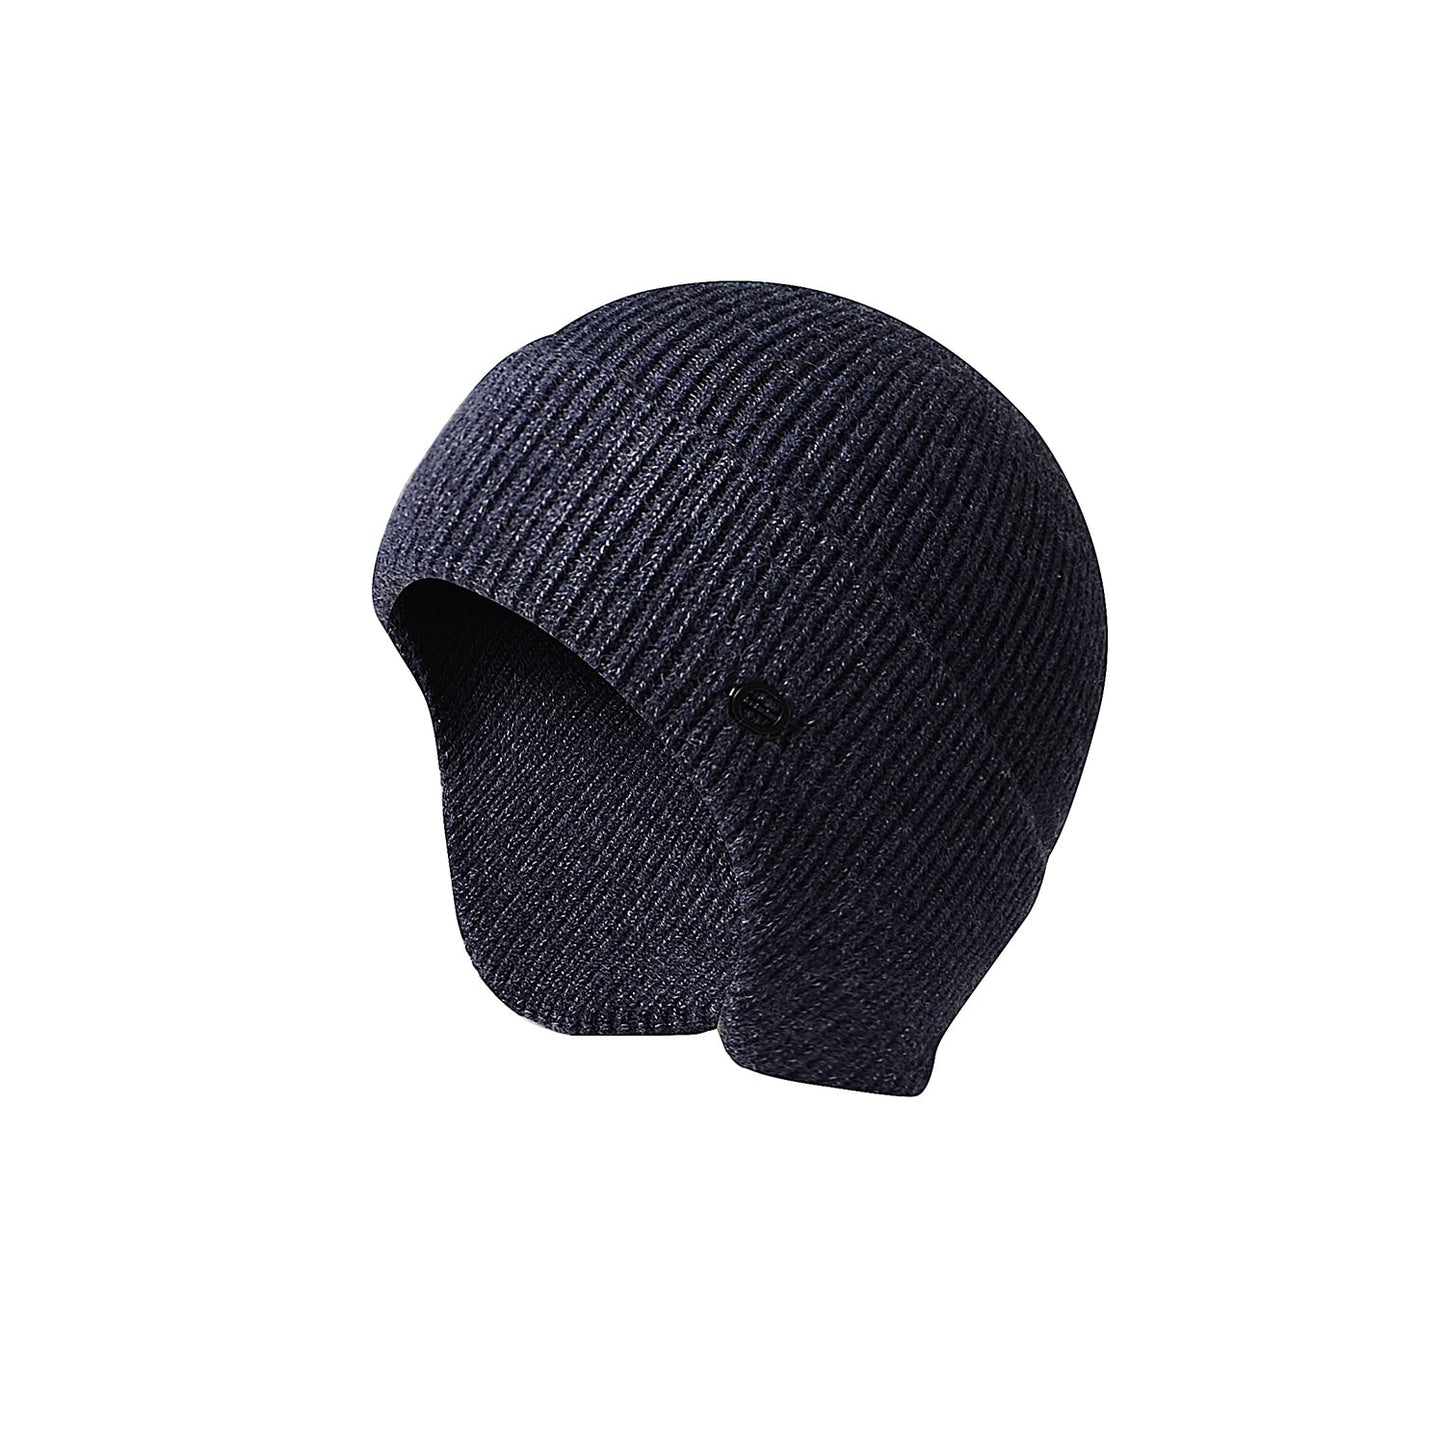 C Knitted Beanie Hat Mens winter cap with earmuff 14:173#C Knitted Beanie Hat